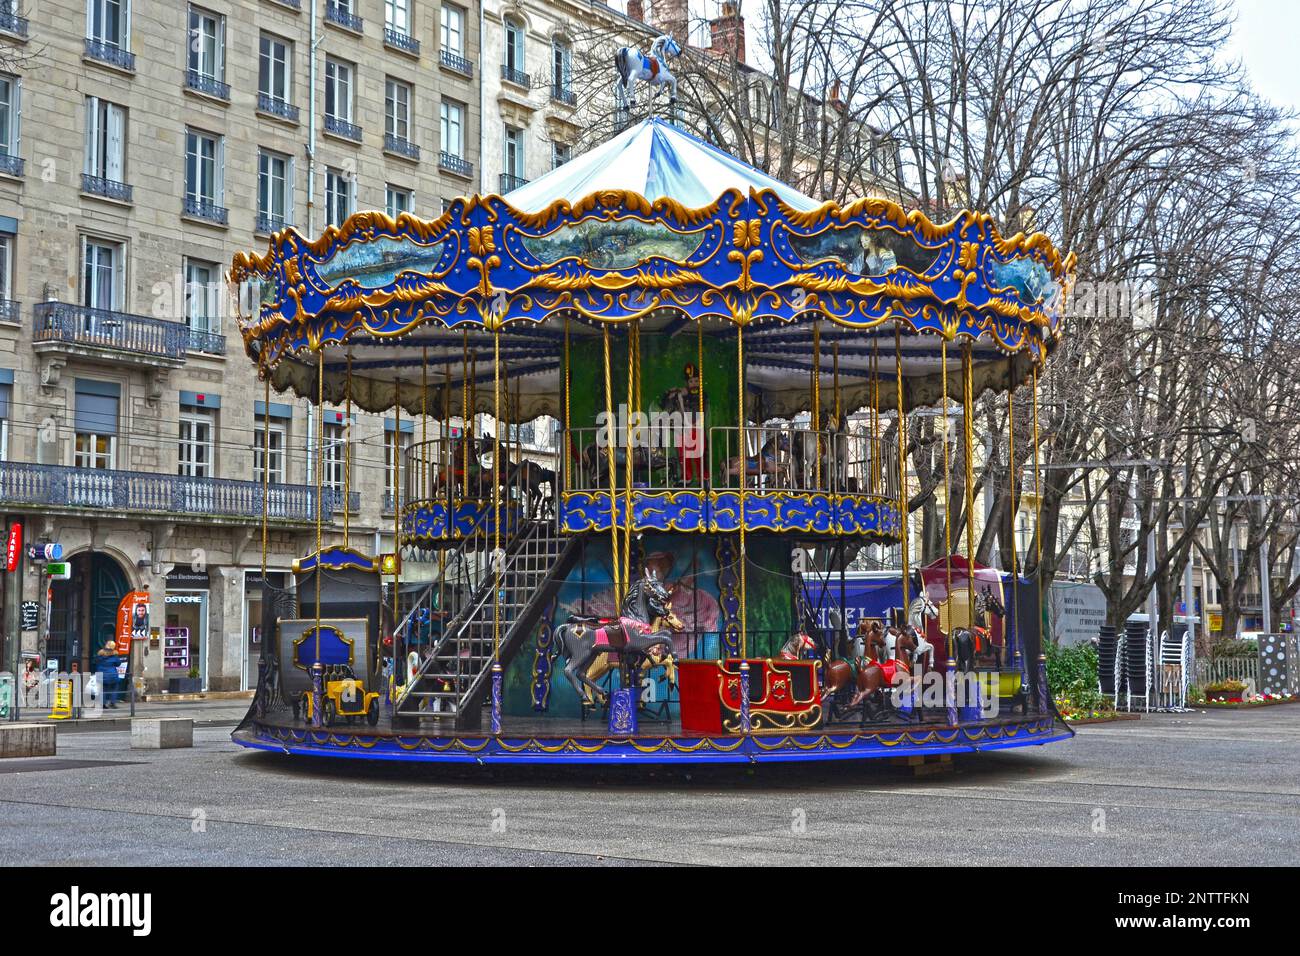 Saint-Etienne, France - January 27th 2020 : Focus on a traditional carousel, closed for the day. The kids can go on animals like horses and reindeers. Stock Photo